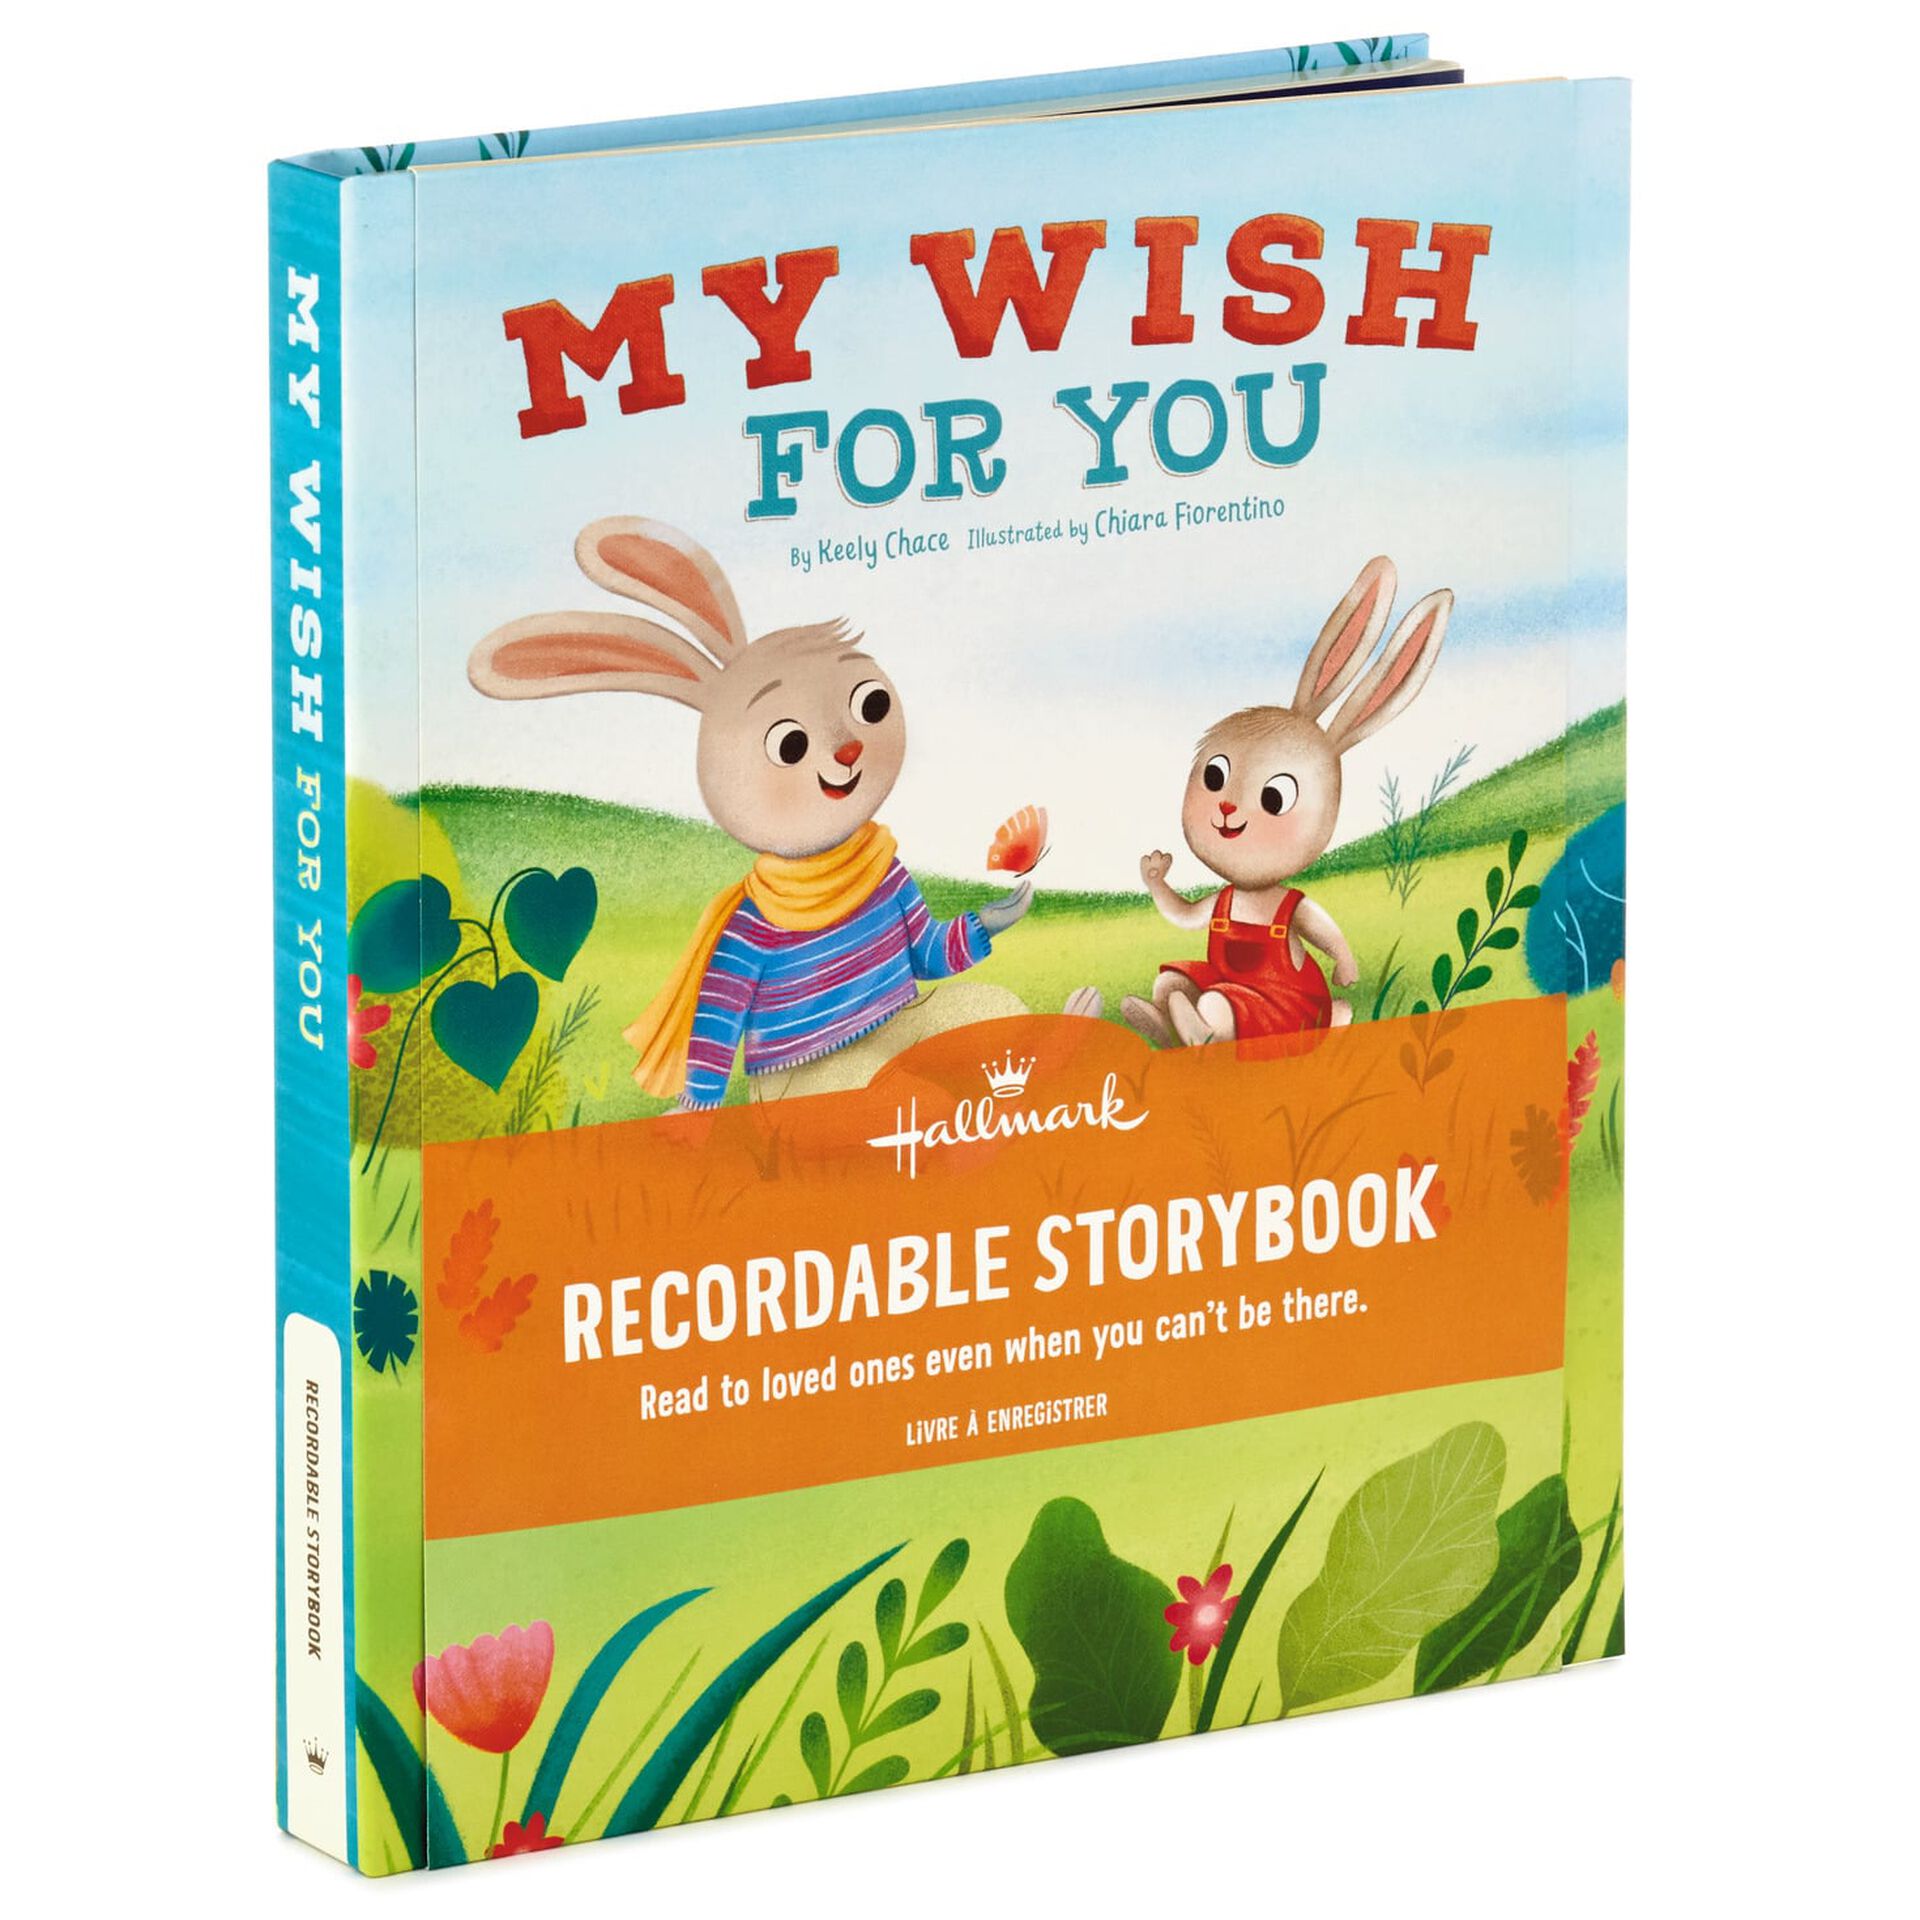 My Wish For You. Recordable Storybook